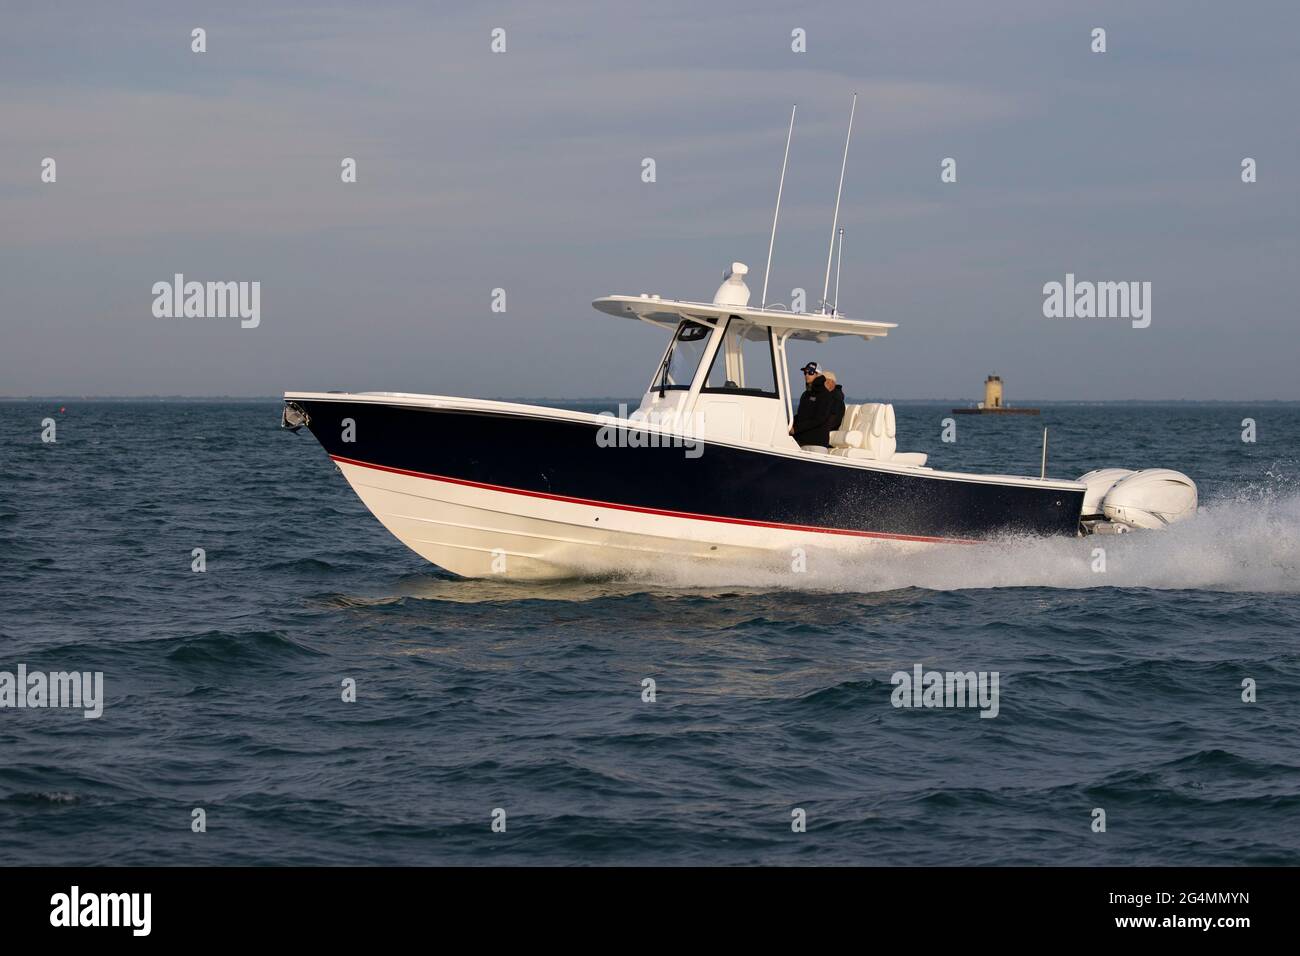 A center console boat cruising on a lake with a lighthouse in the background. Stock Photo